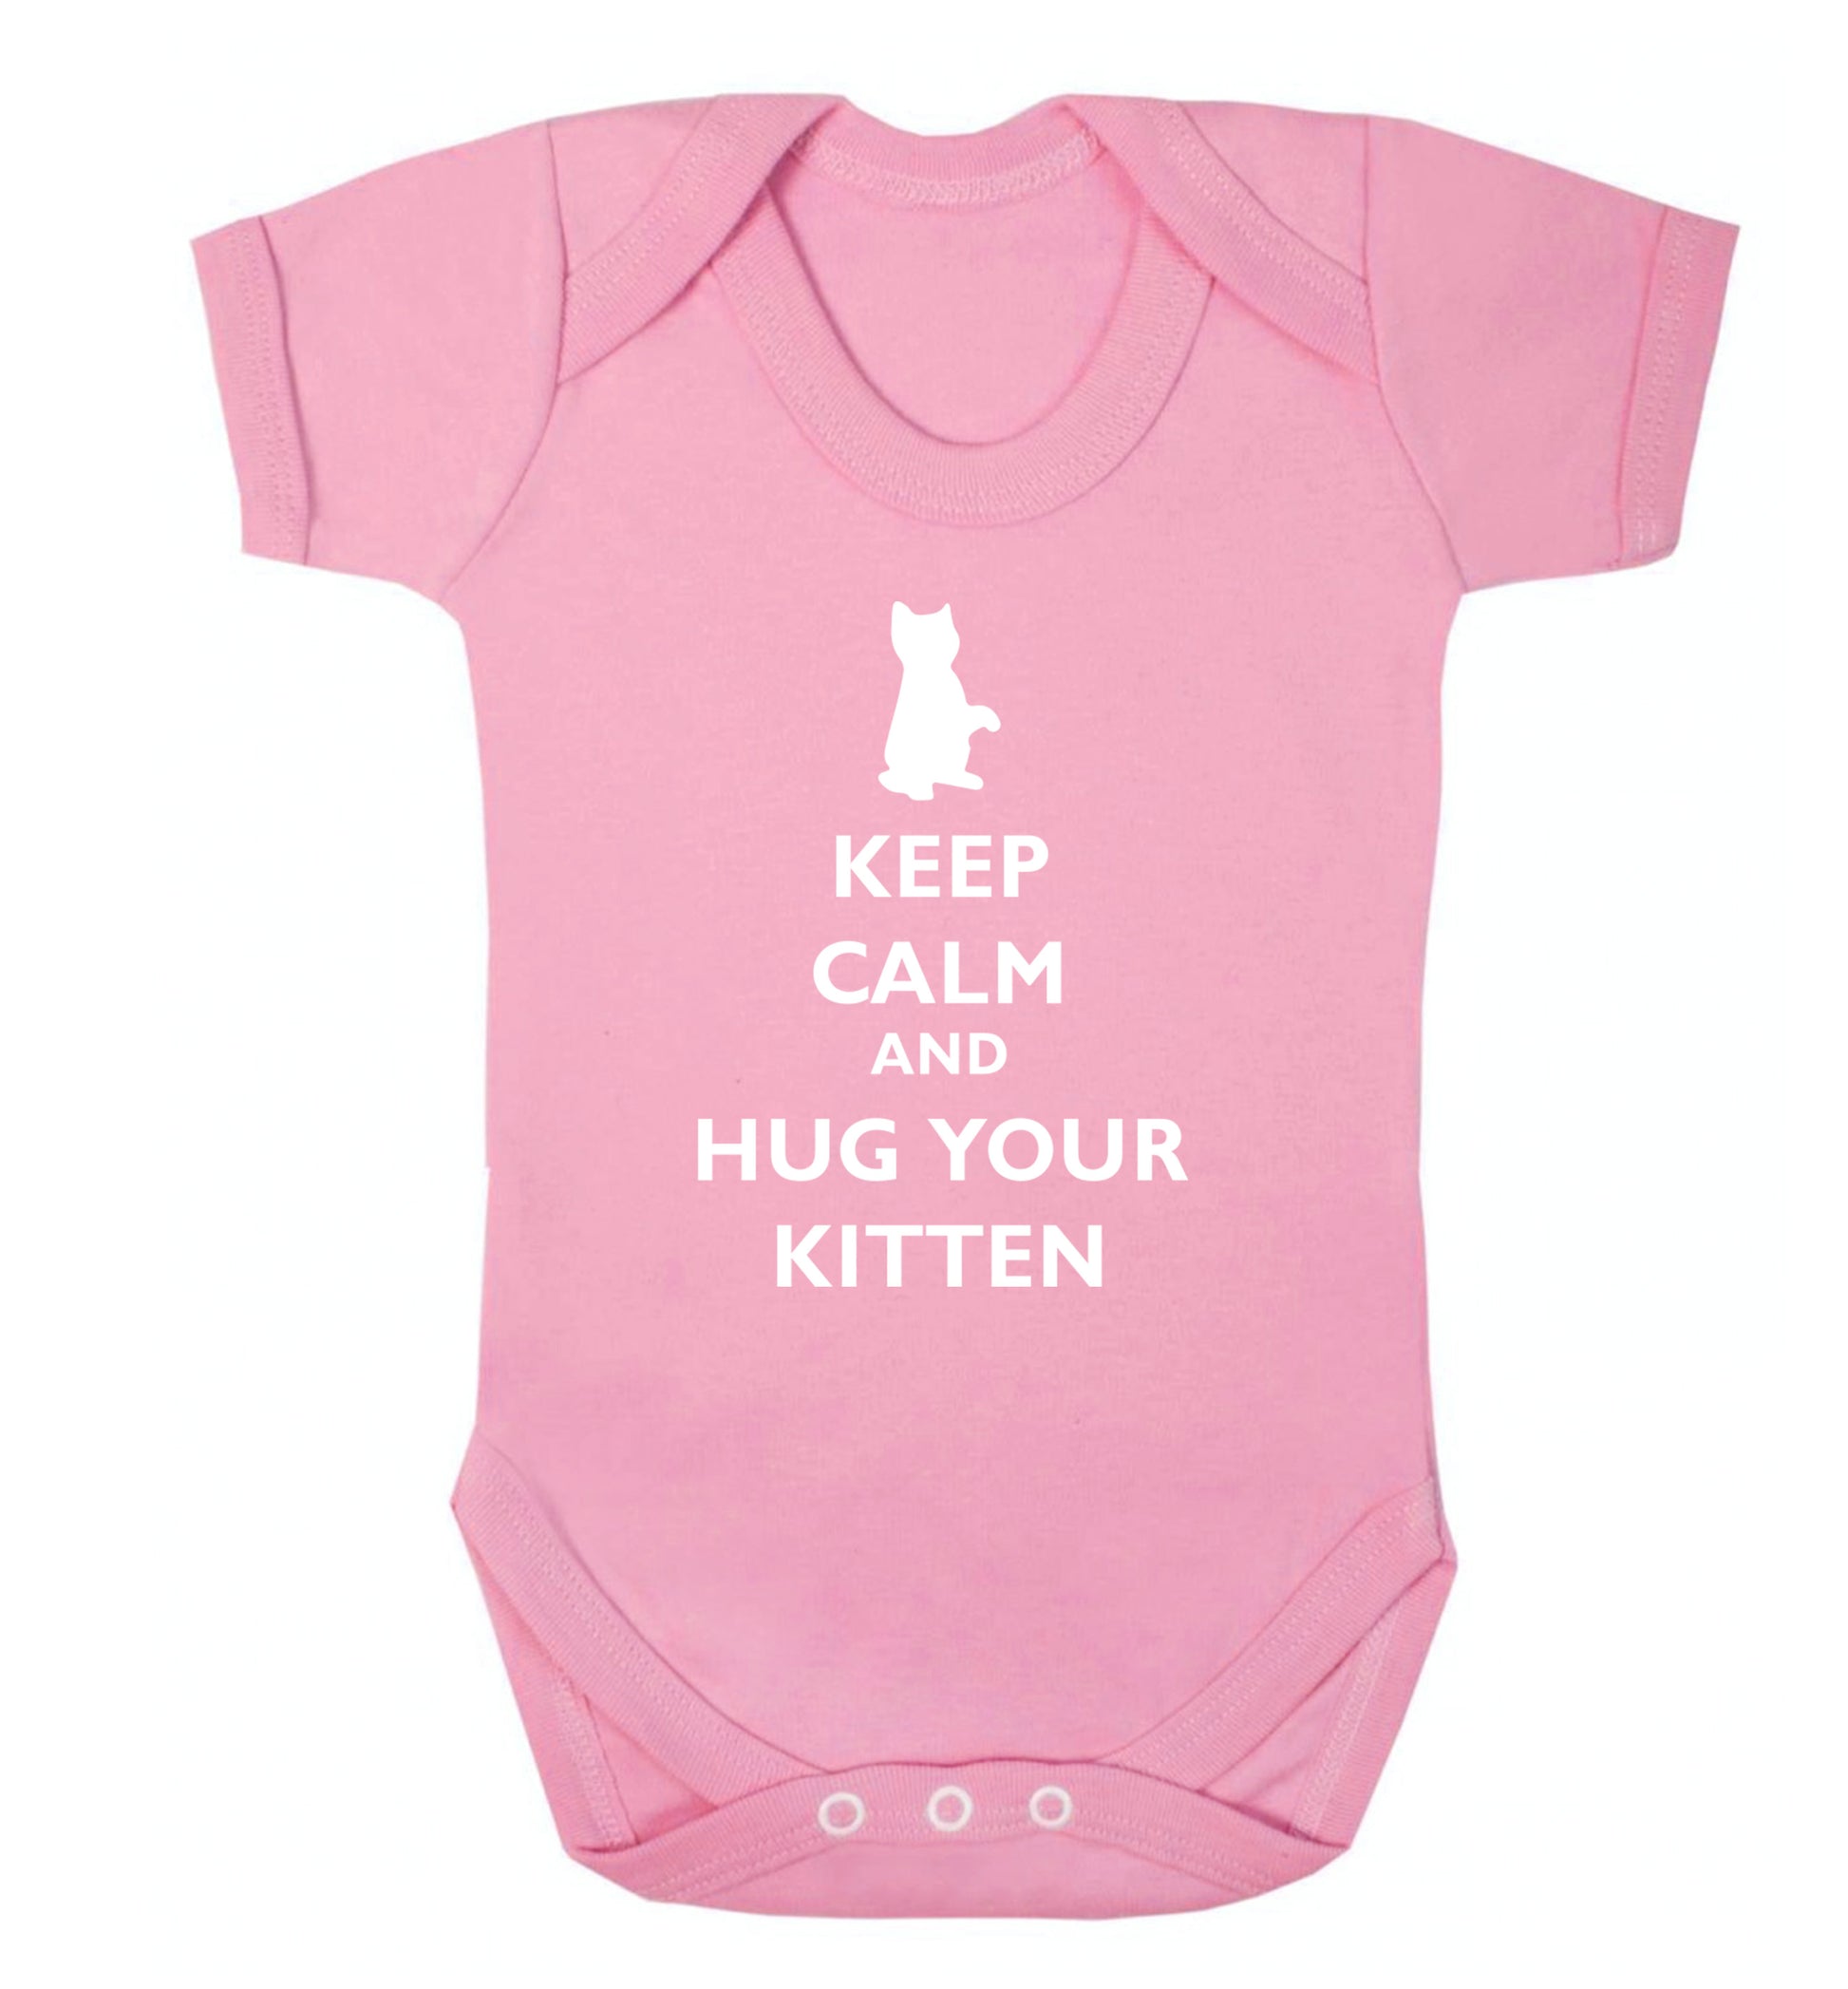 Keep calm and hug your kitten Baby Vest pale pink 18-24 months